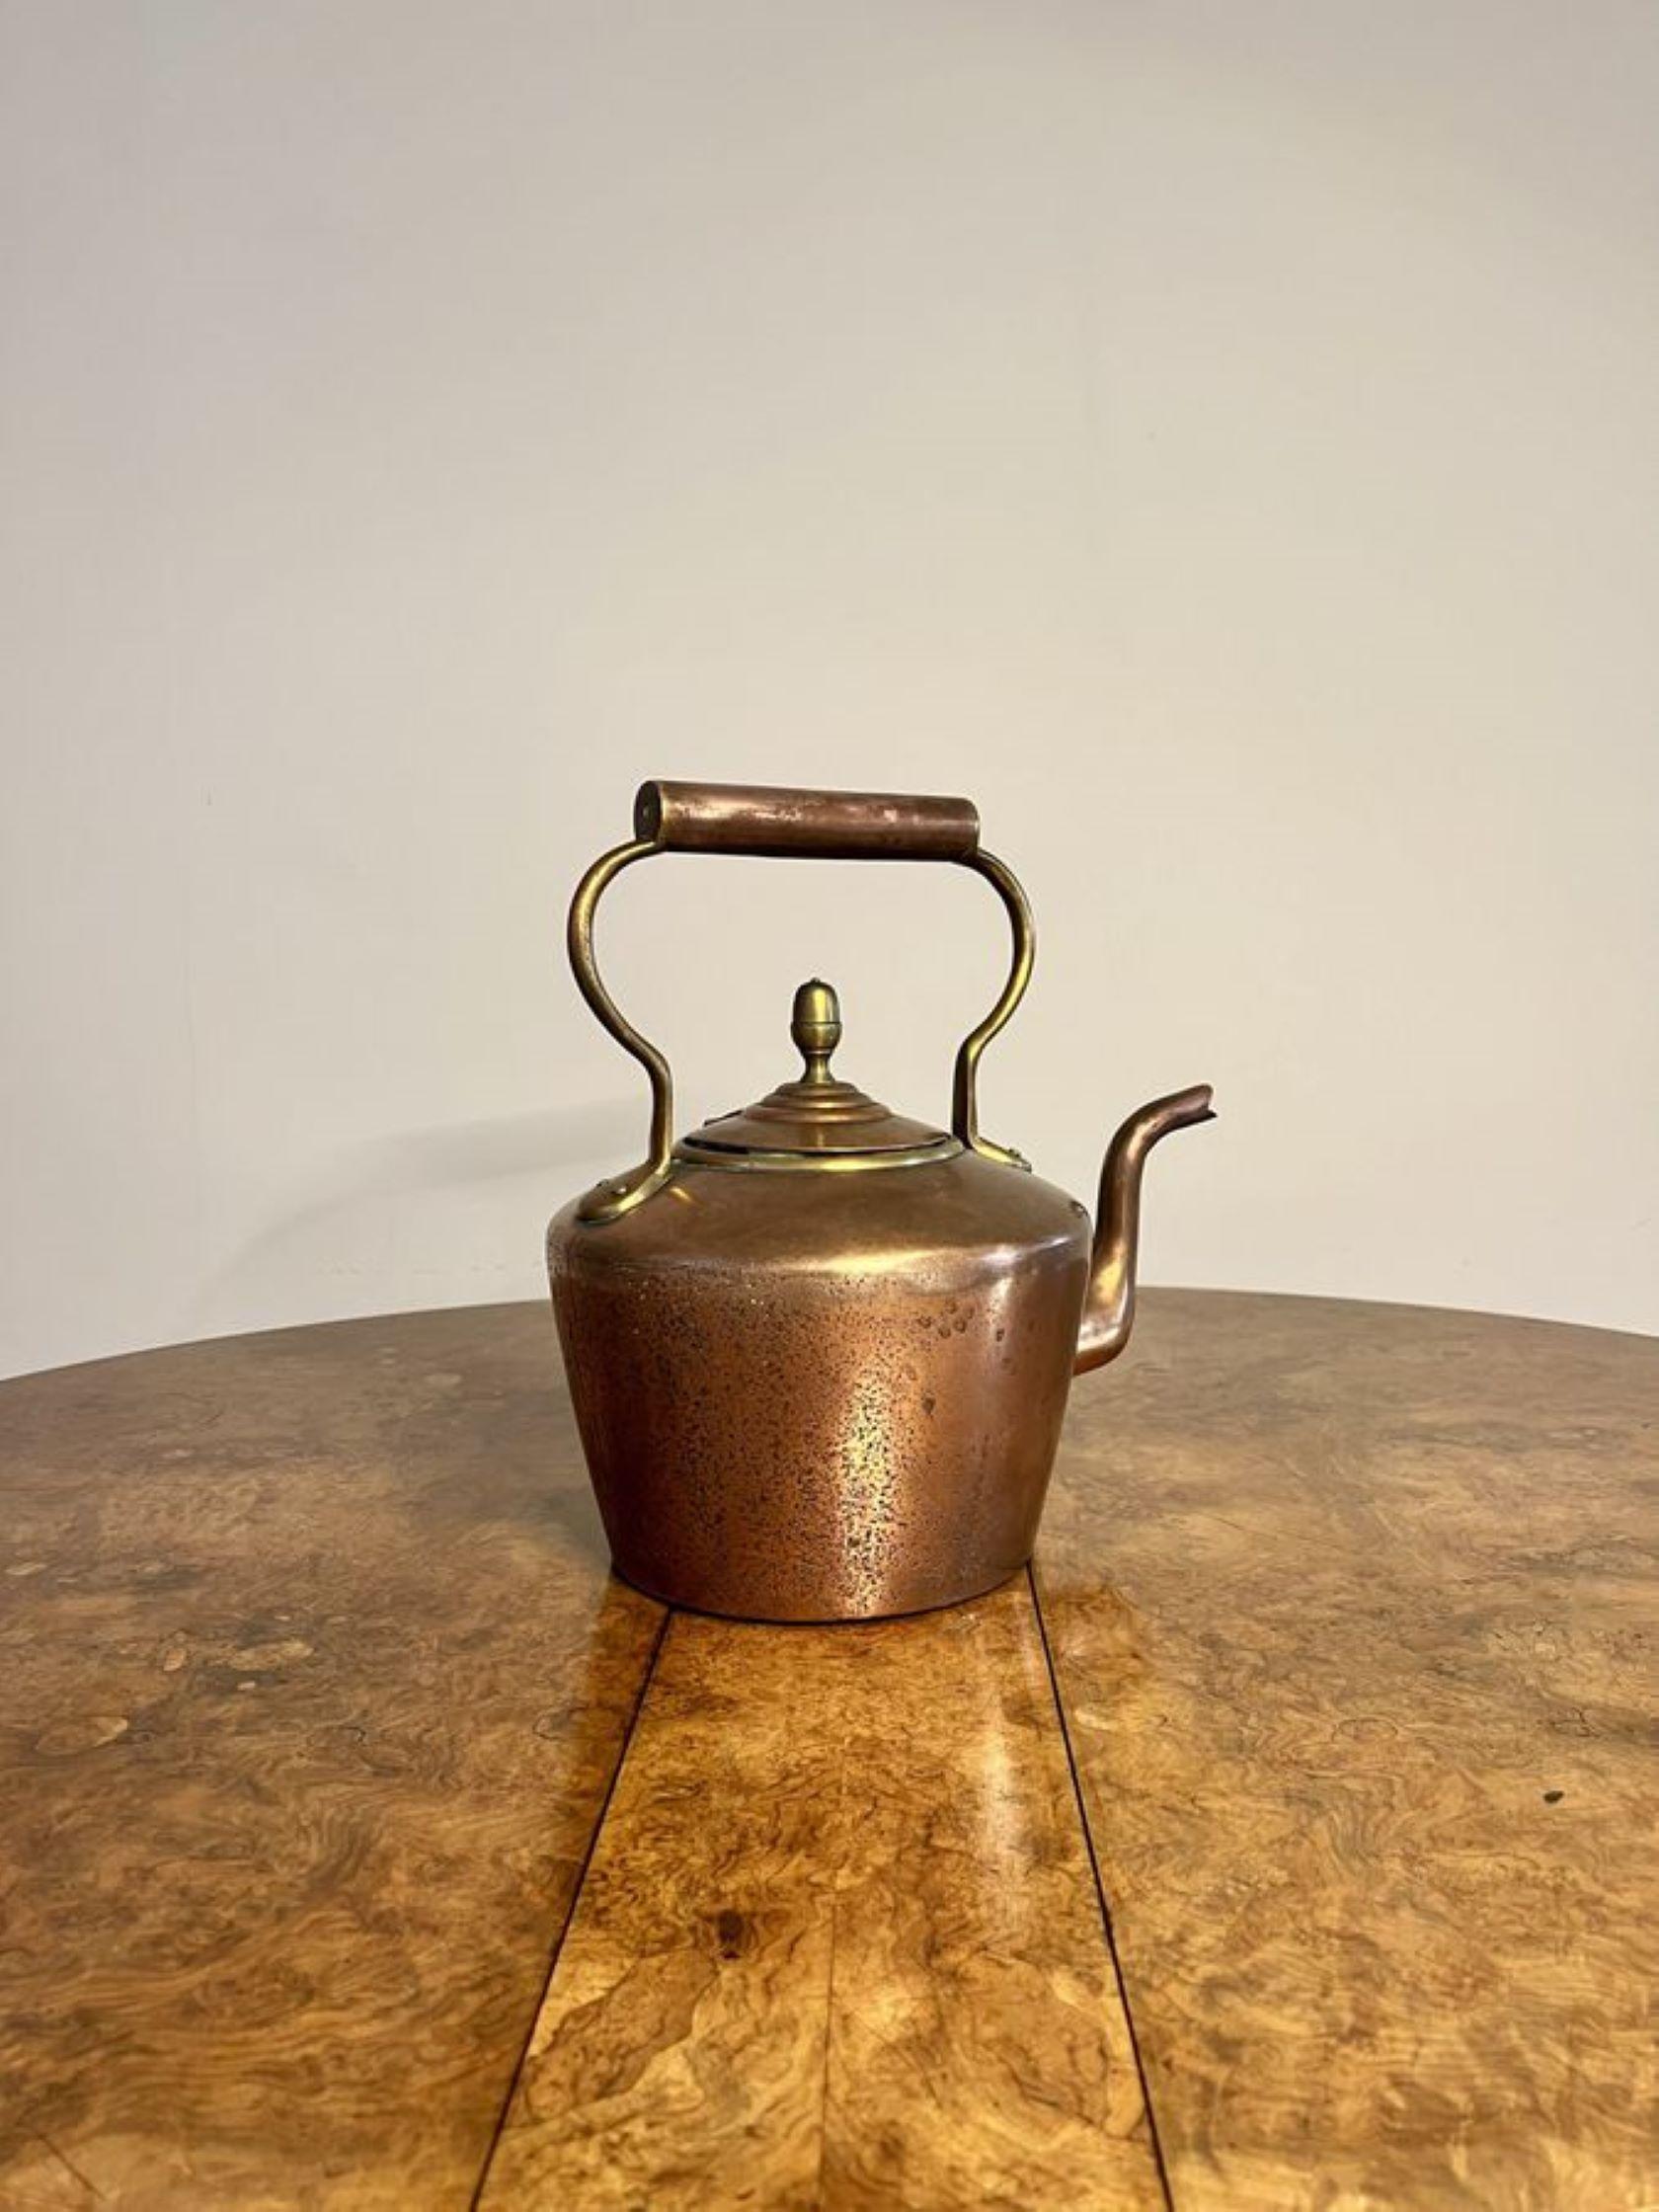 Lovely antique George III copper kettle having a quality copper antique George III kettle with a shaped handle to the top, a shaped spout, with a hinged lid and the original knob.

D. 1800